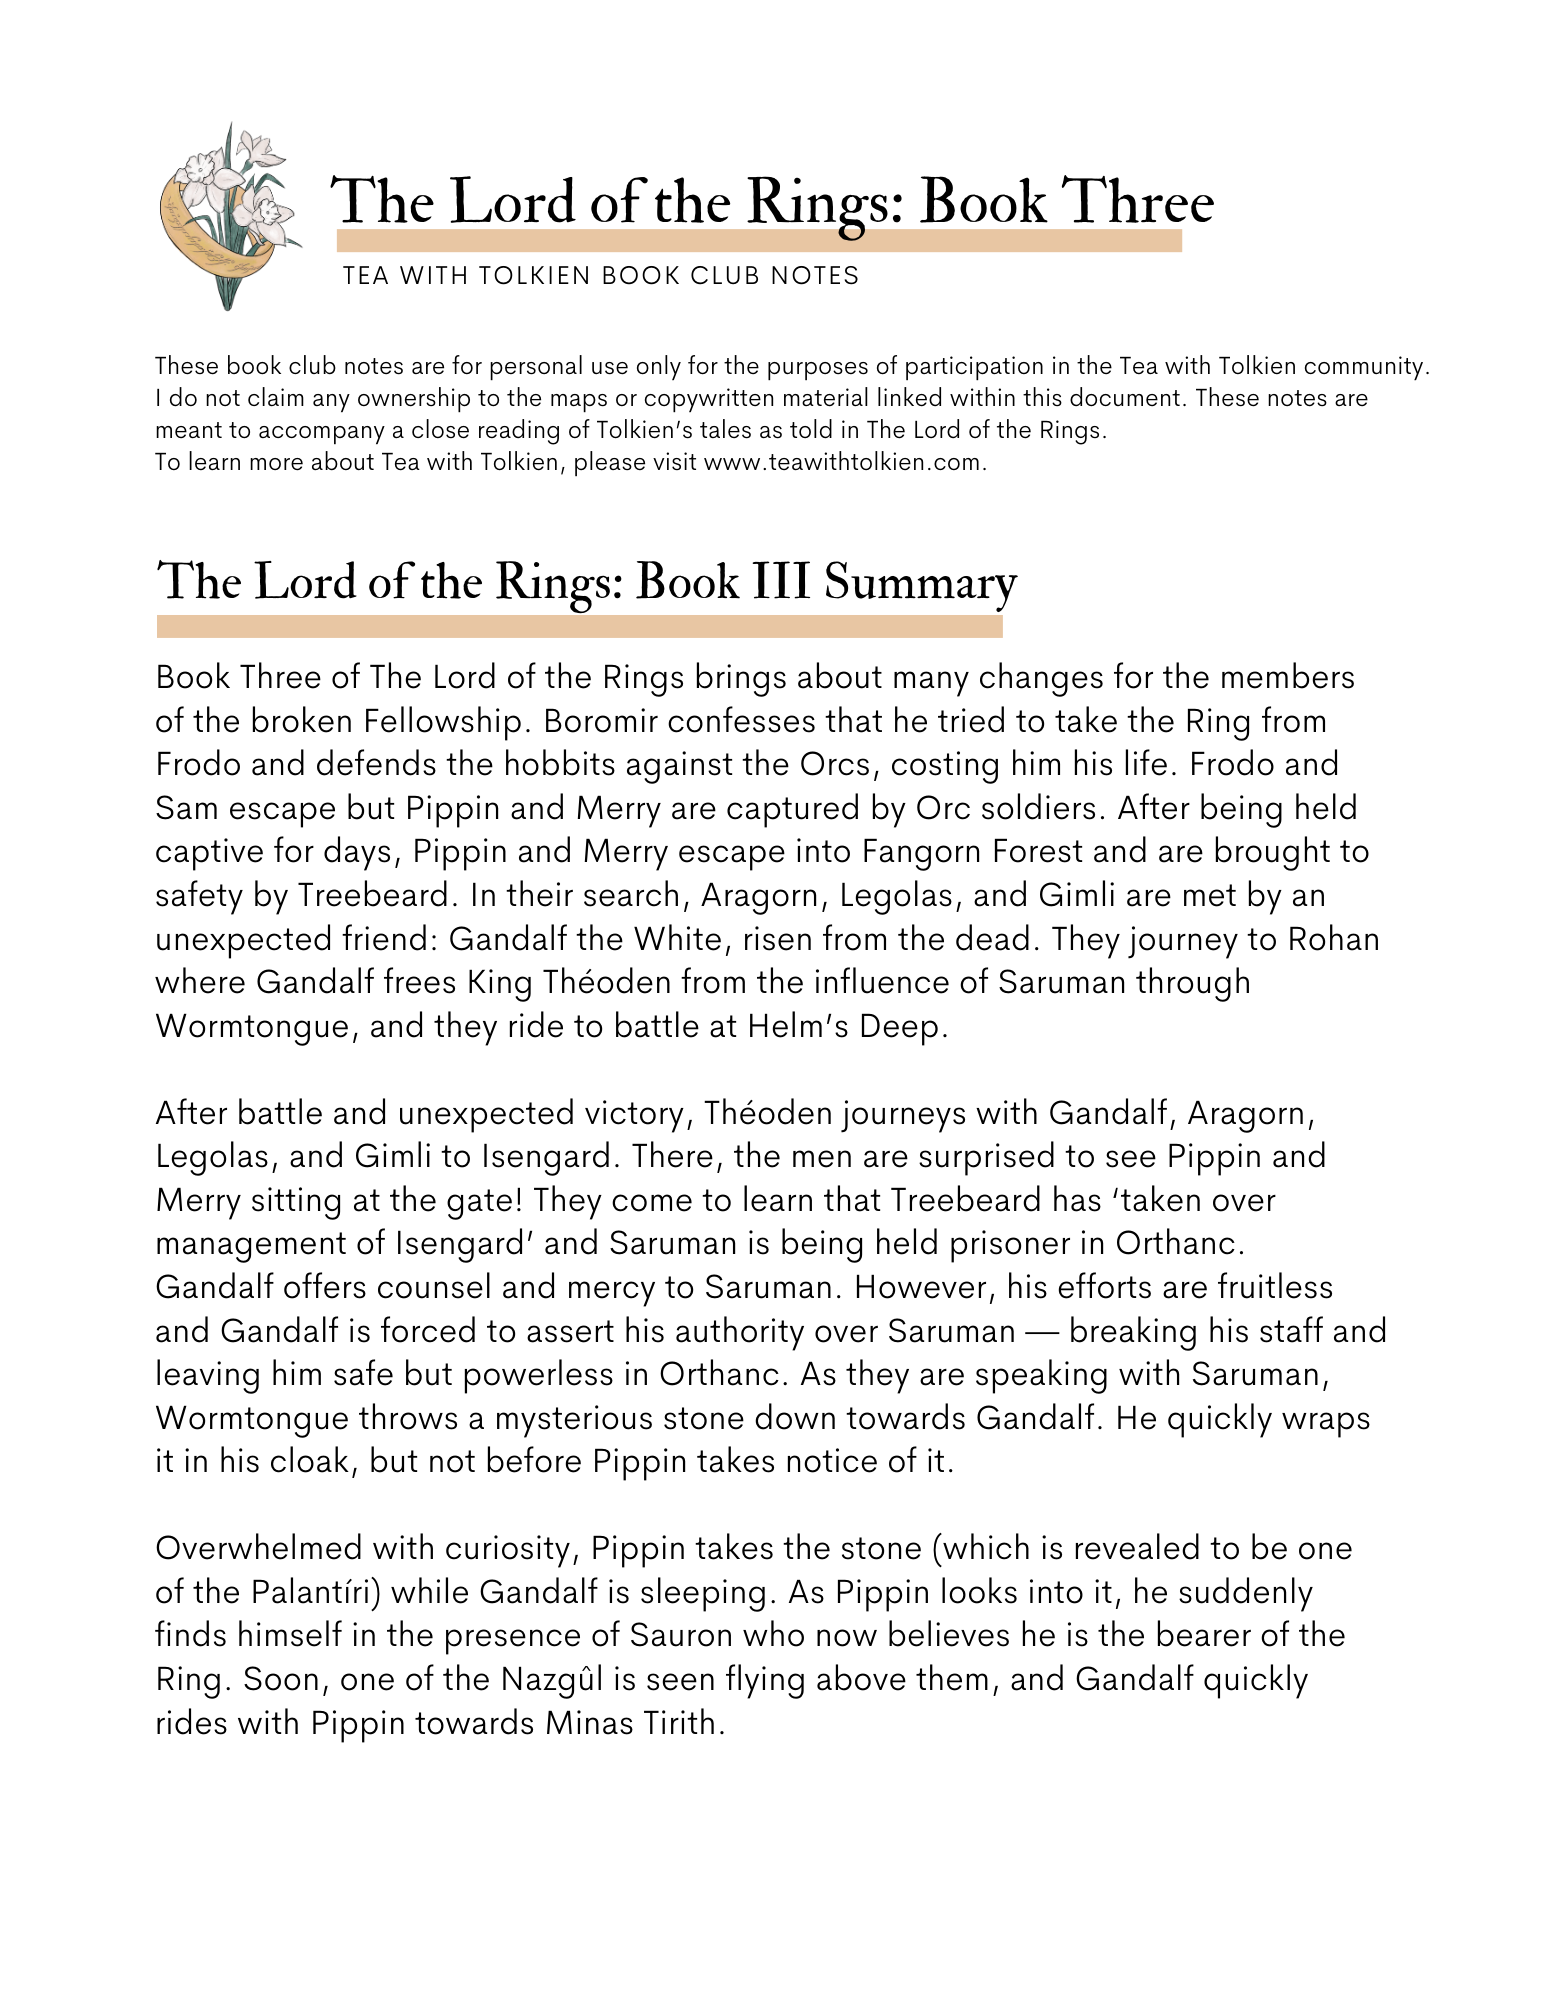 Lord of the Rings: War of the Ring — CultureSlate